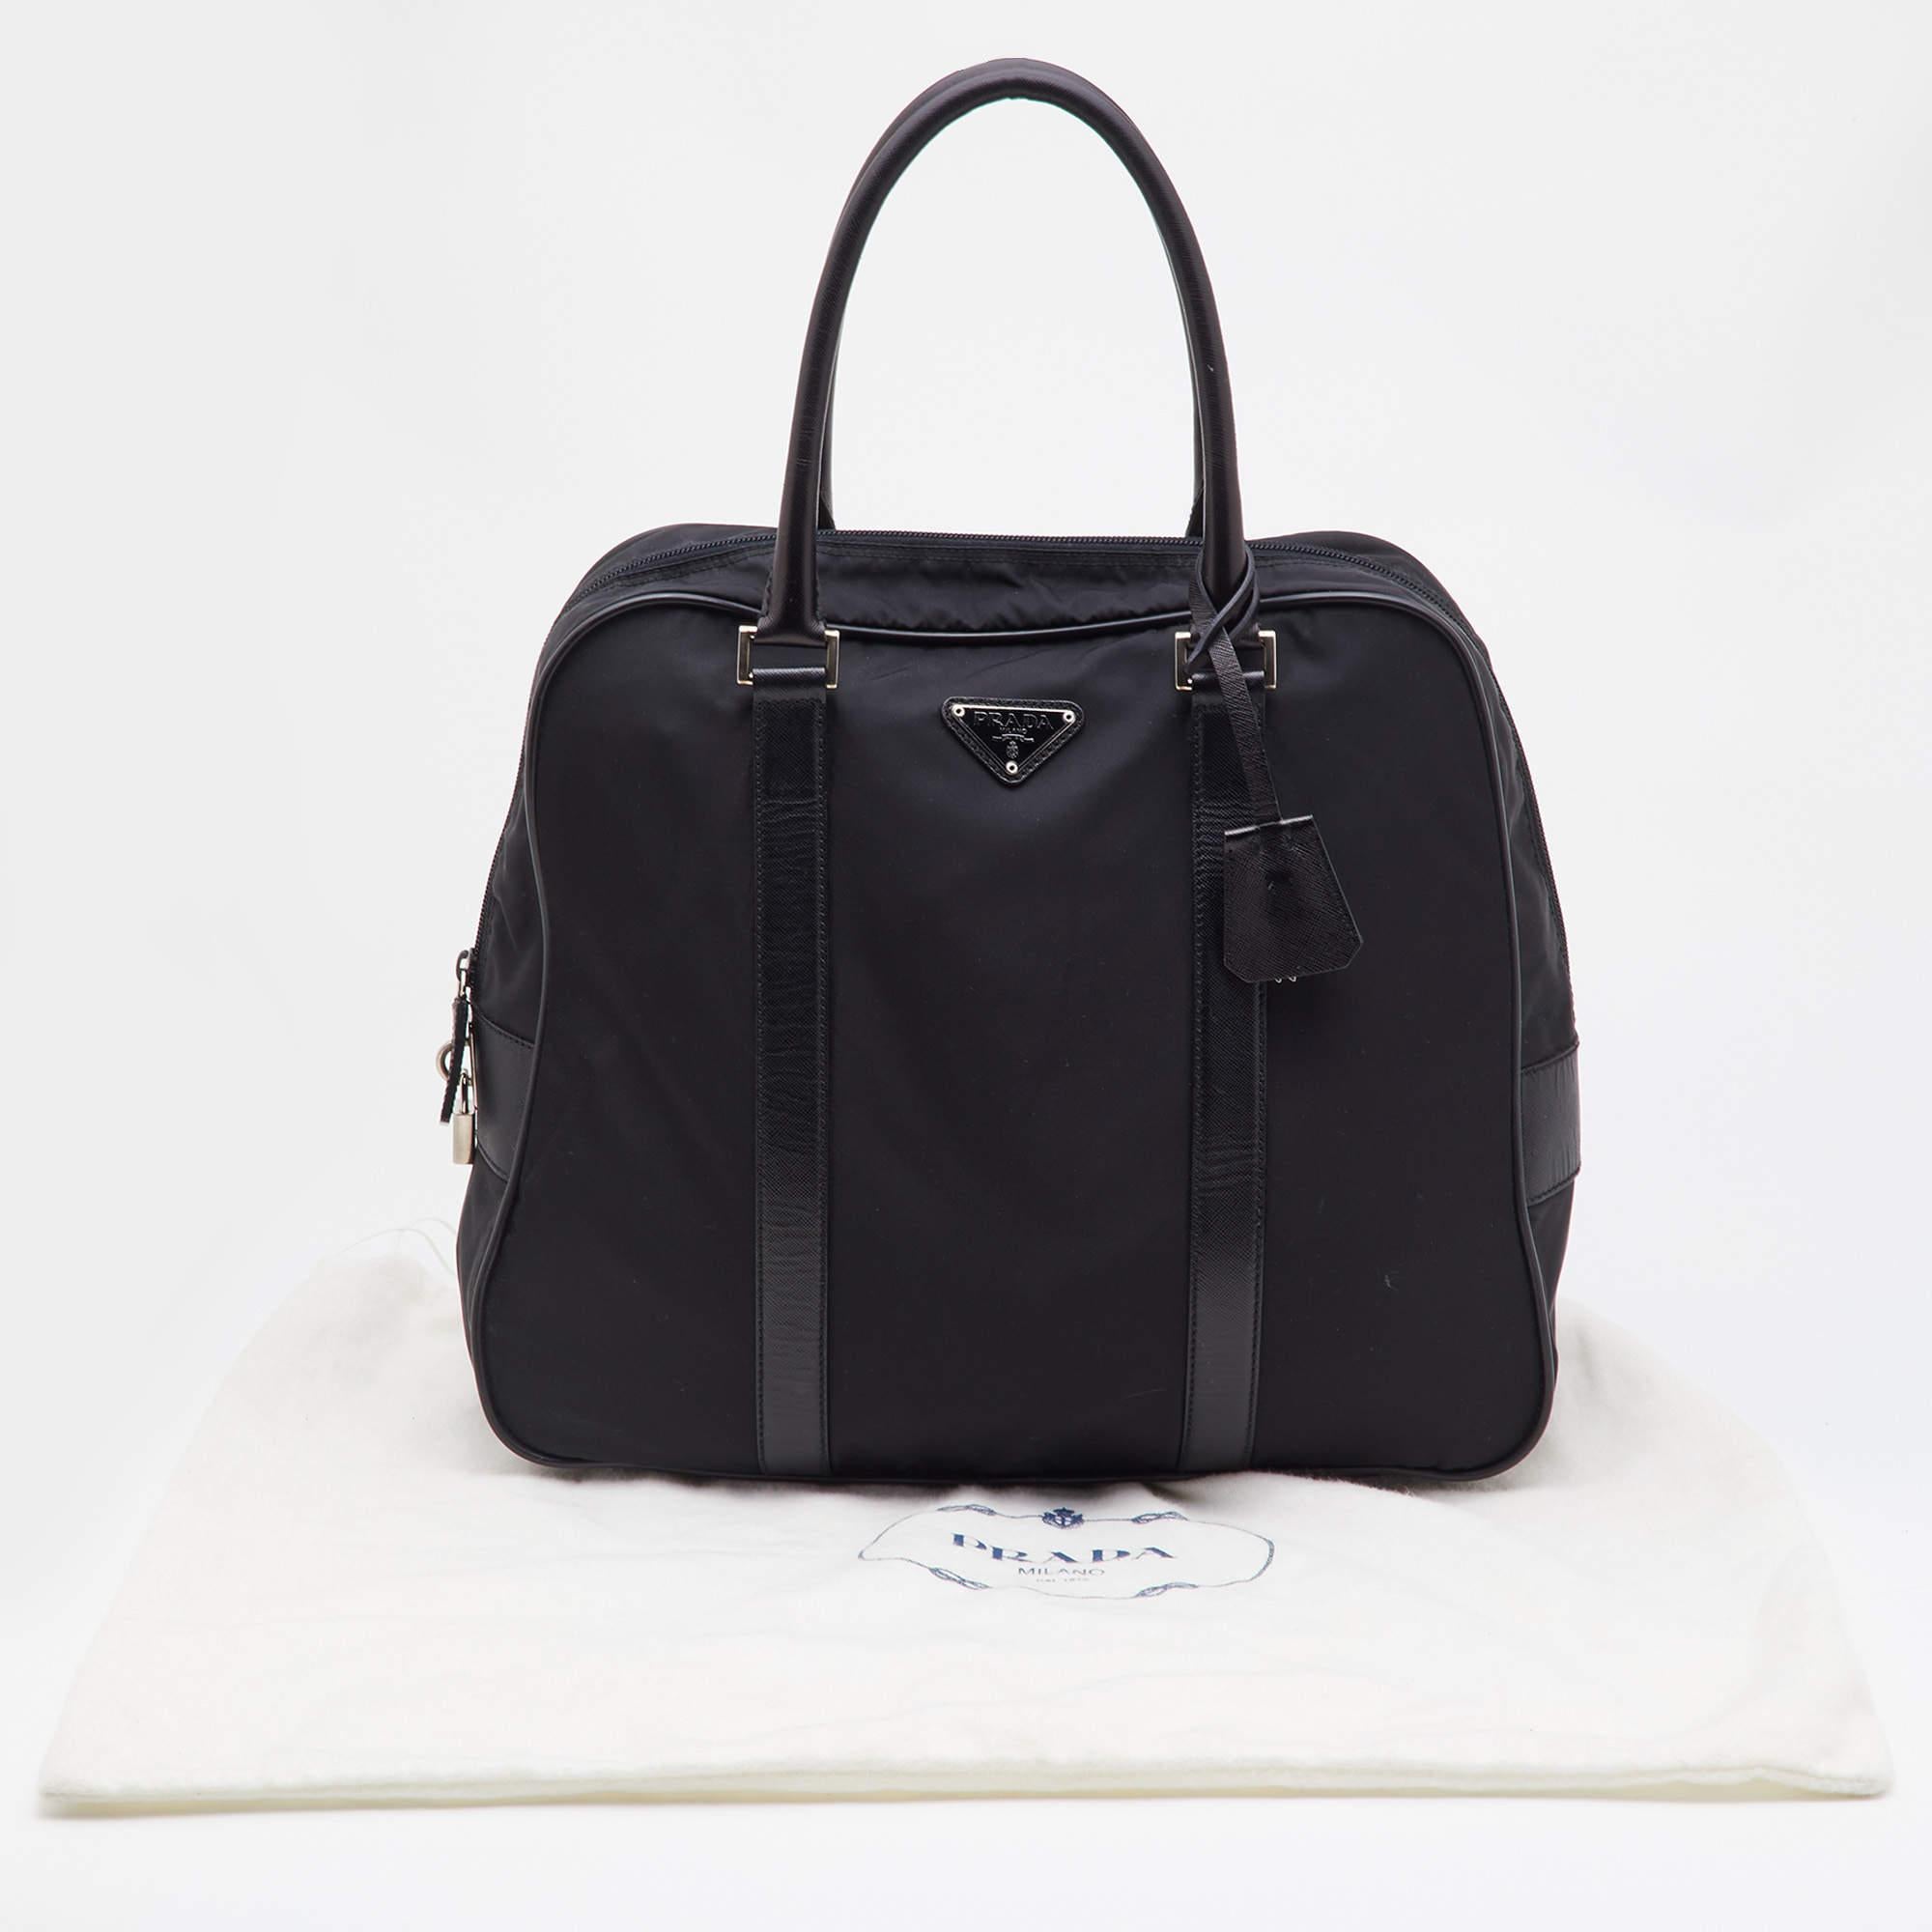 This Prada accessory is an example of the brand's fine designs that are skillfully crafted to project a classic charm. It is a functional creation with an elevating appeal.

Includes: Original Dustbag, Padlock and Keys
